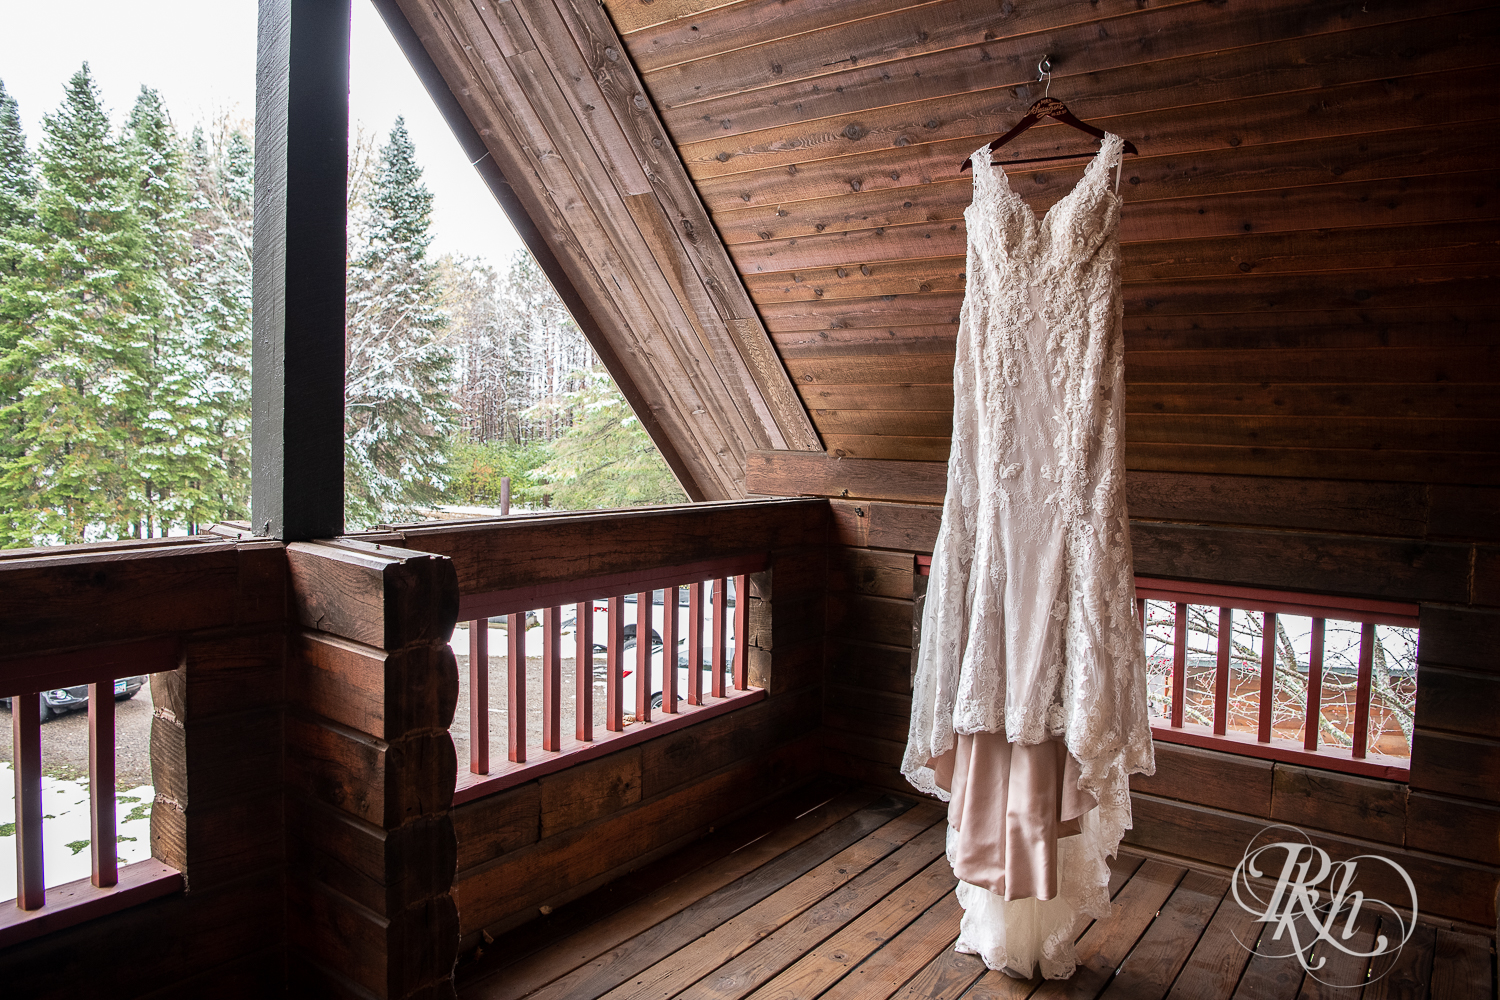 Wedding dress hanging front the ceiling of a cabin A-frame in Stillwater, Minnesota.